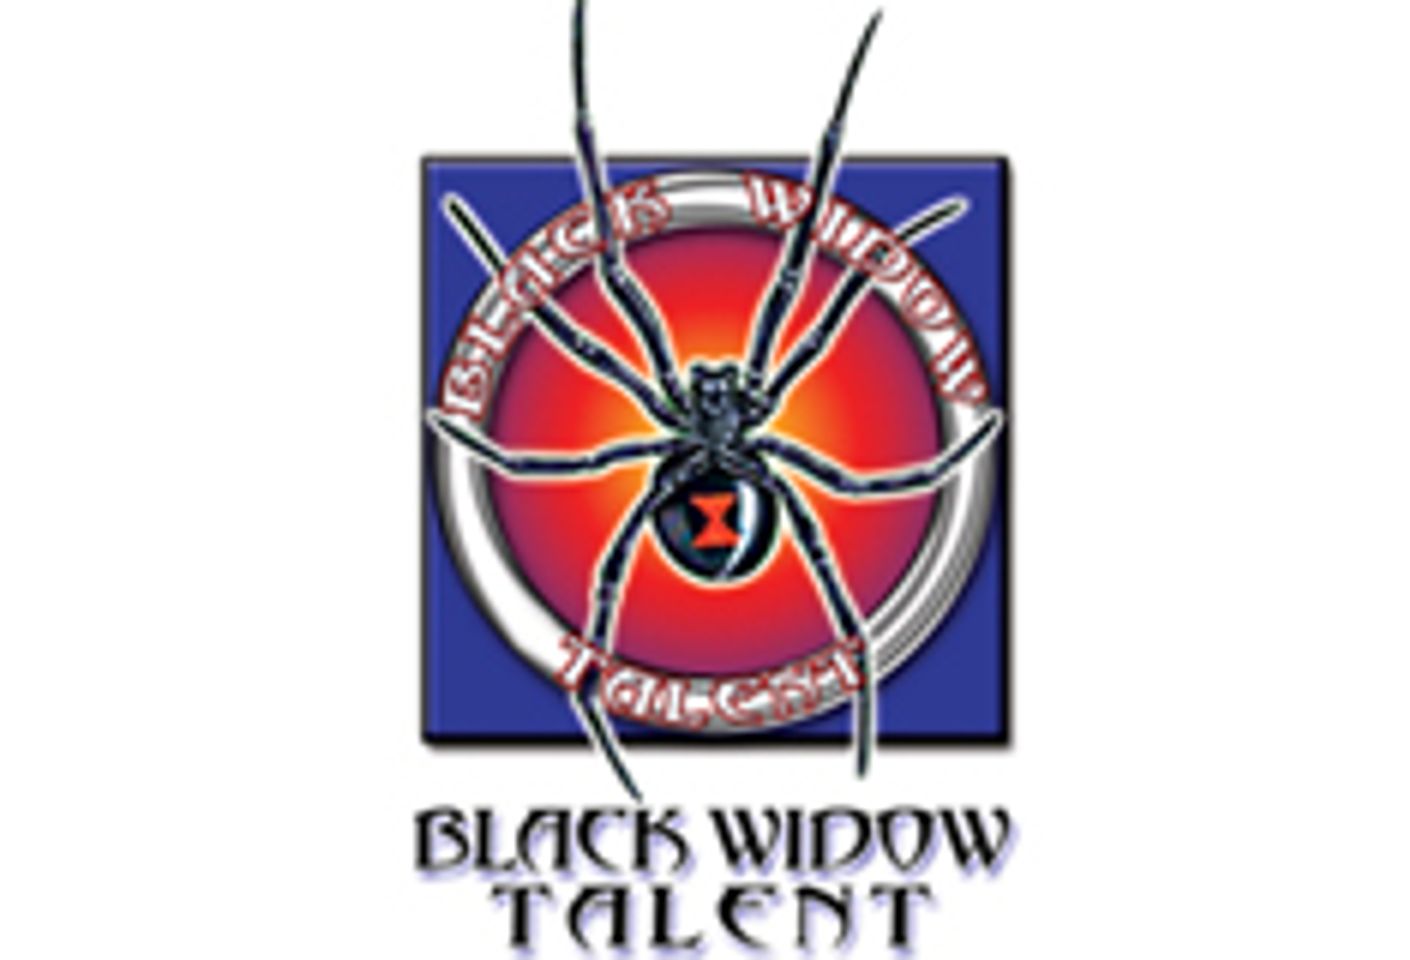 Black Widow Talent Offers Vegas Location to Producers at AEE